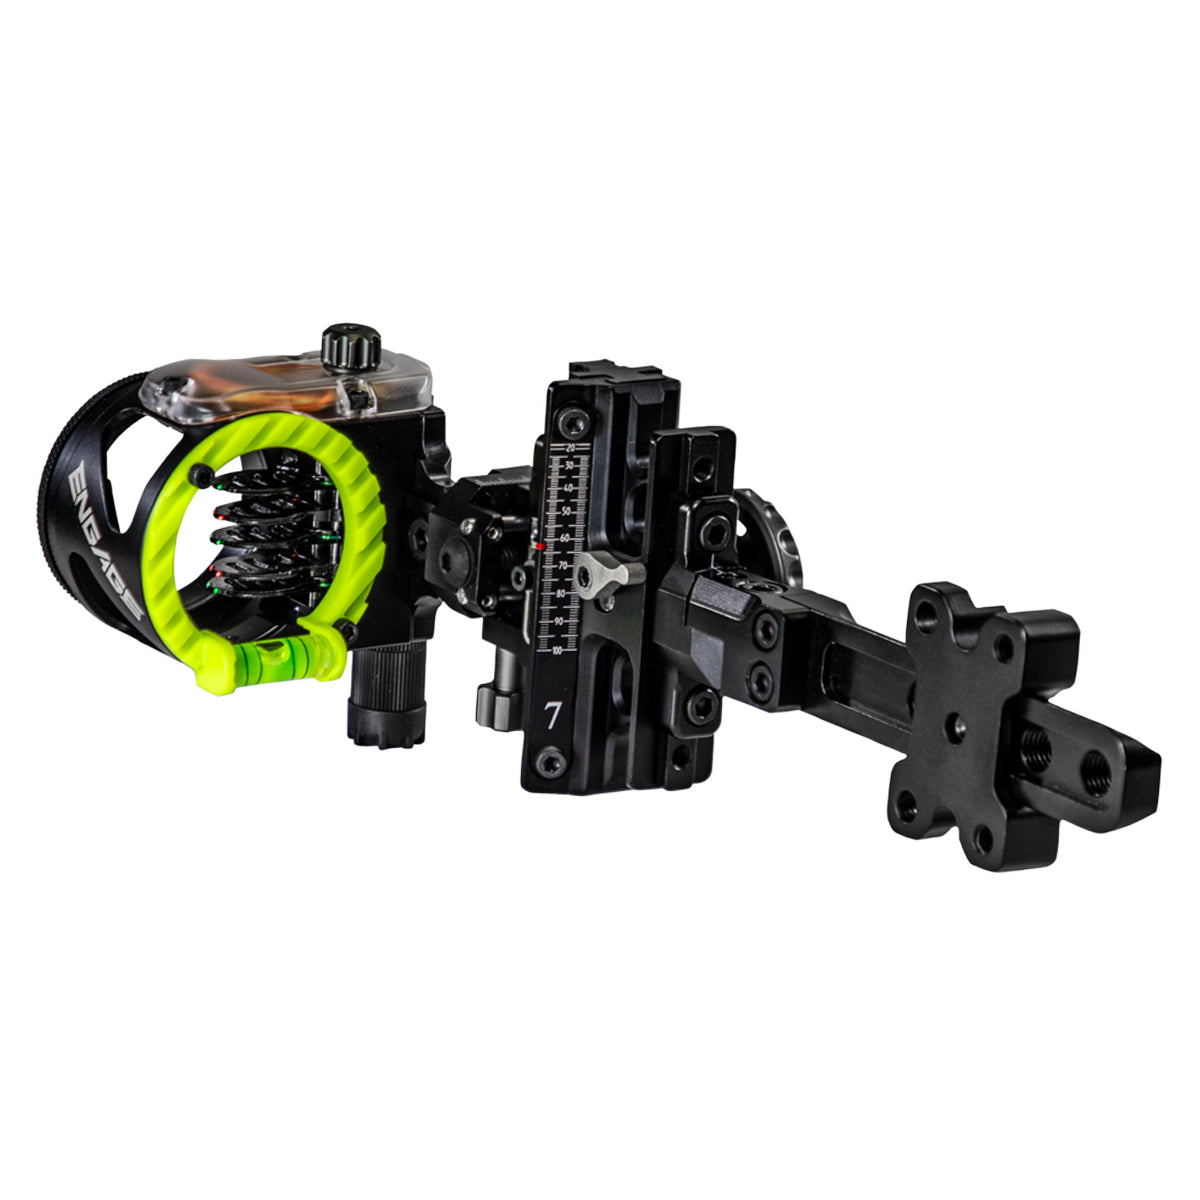 CBE Engage Hybrid 5 Pin Bow Sight in CBE Engage Hybrid 5 Pin Bow Sight by CBE | Archery - goHUNT Shop by GOHUNT | CBE - GOHUNT Shop